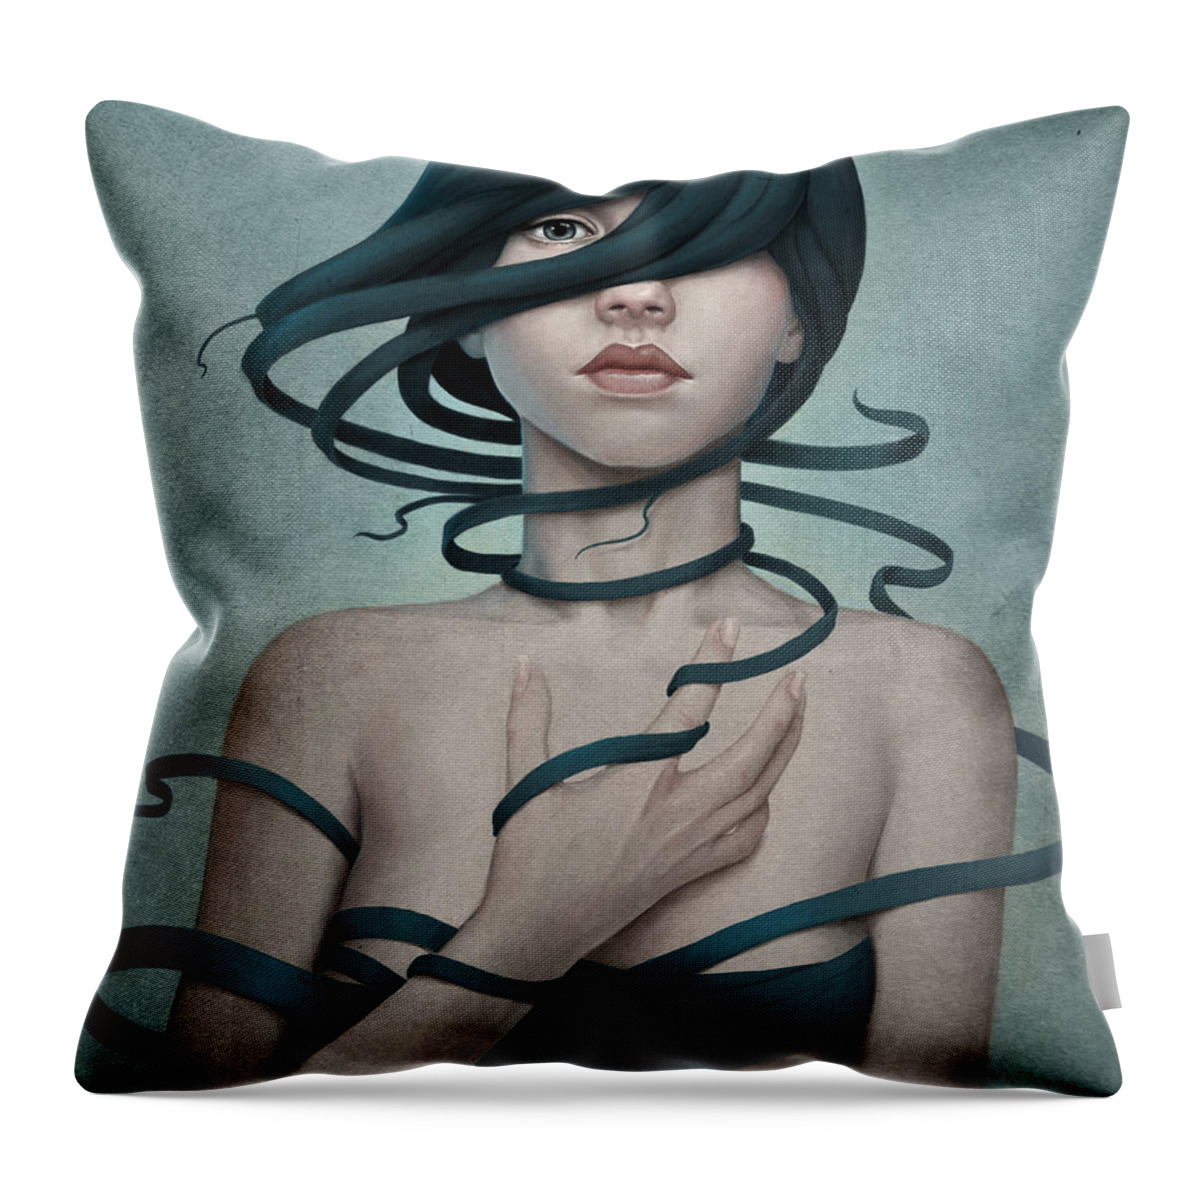 Woman Throw Pillow featuring the digital art Twisted by Diego Fernandez